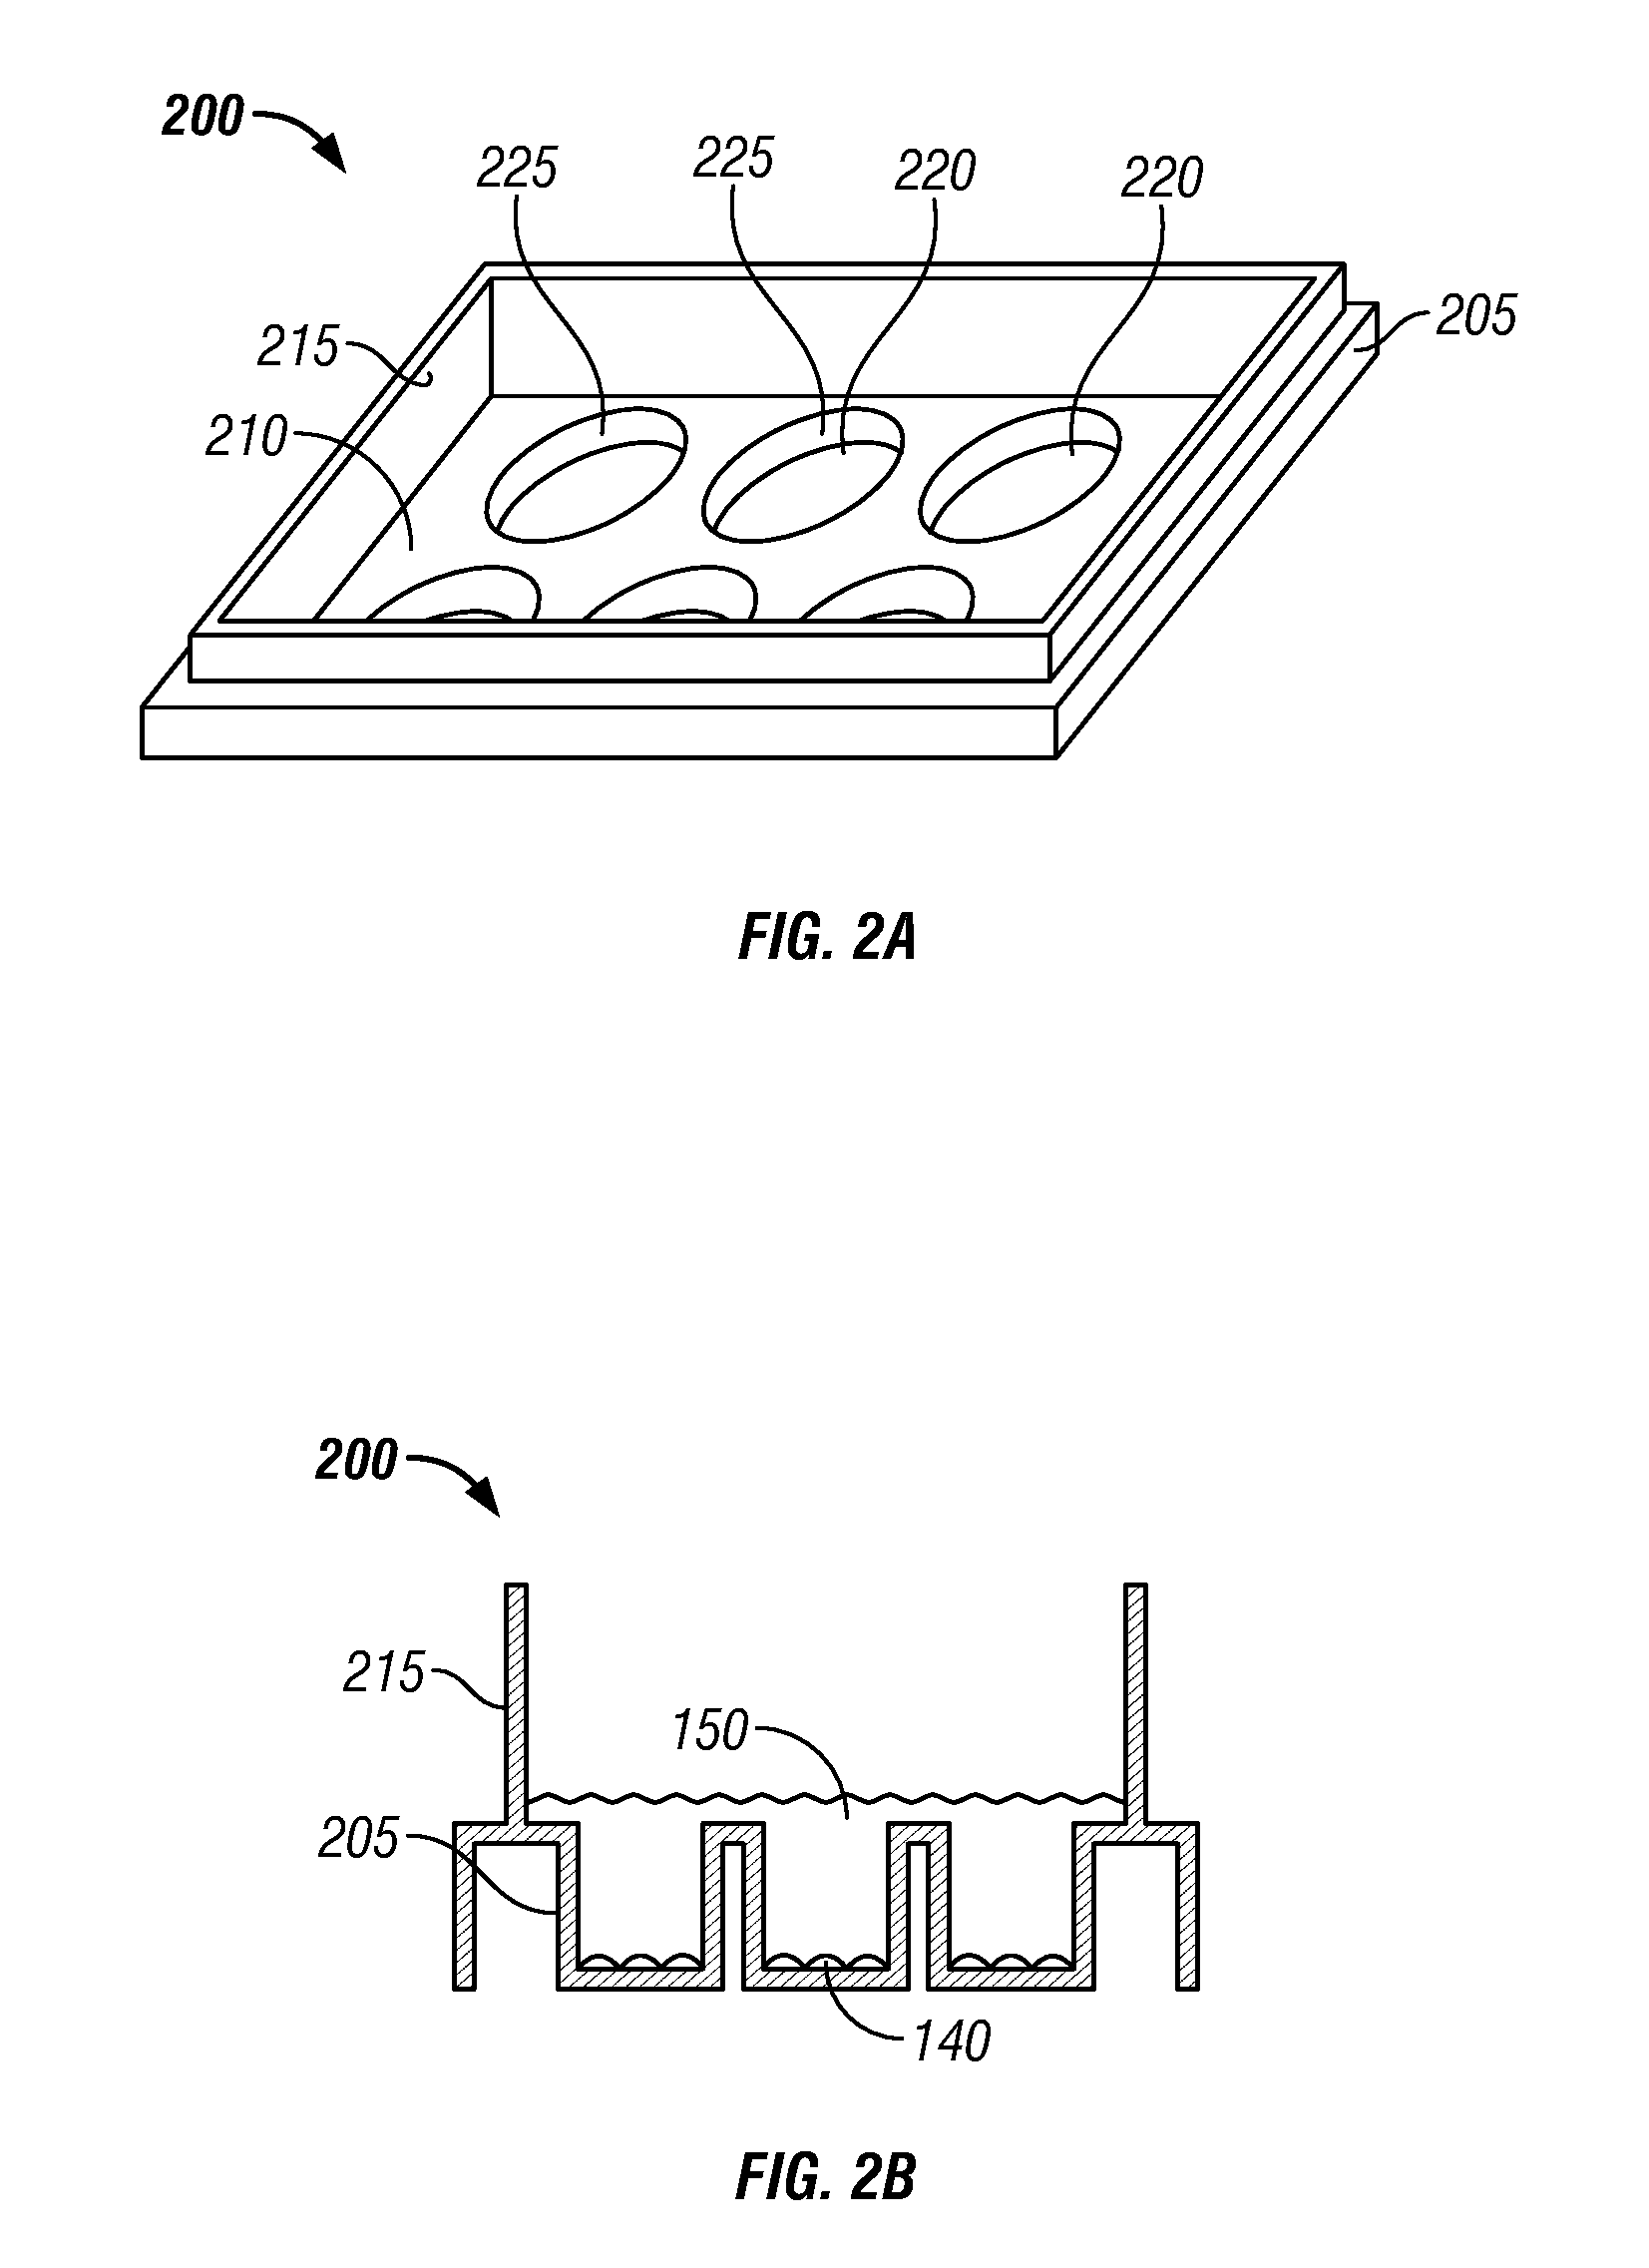 Method for Screening of Agents for the Prevention of Hepatitis C Virus Infection with Cell Culture Tool